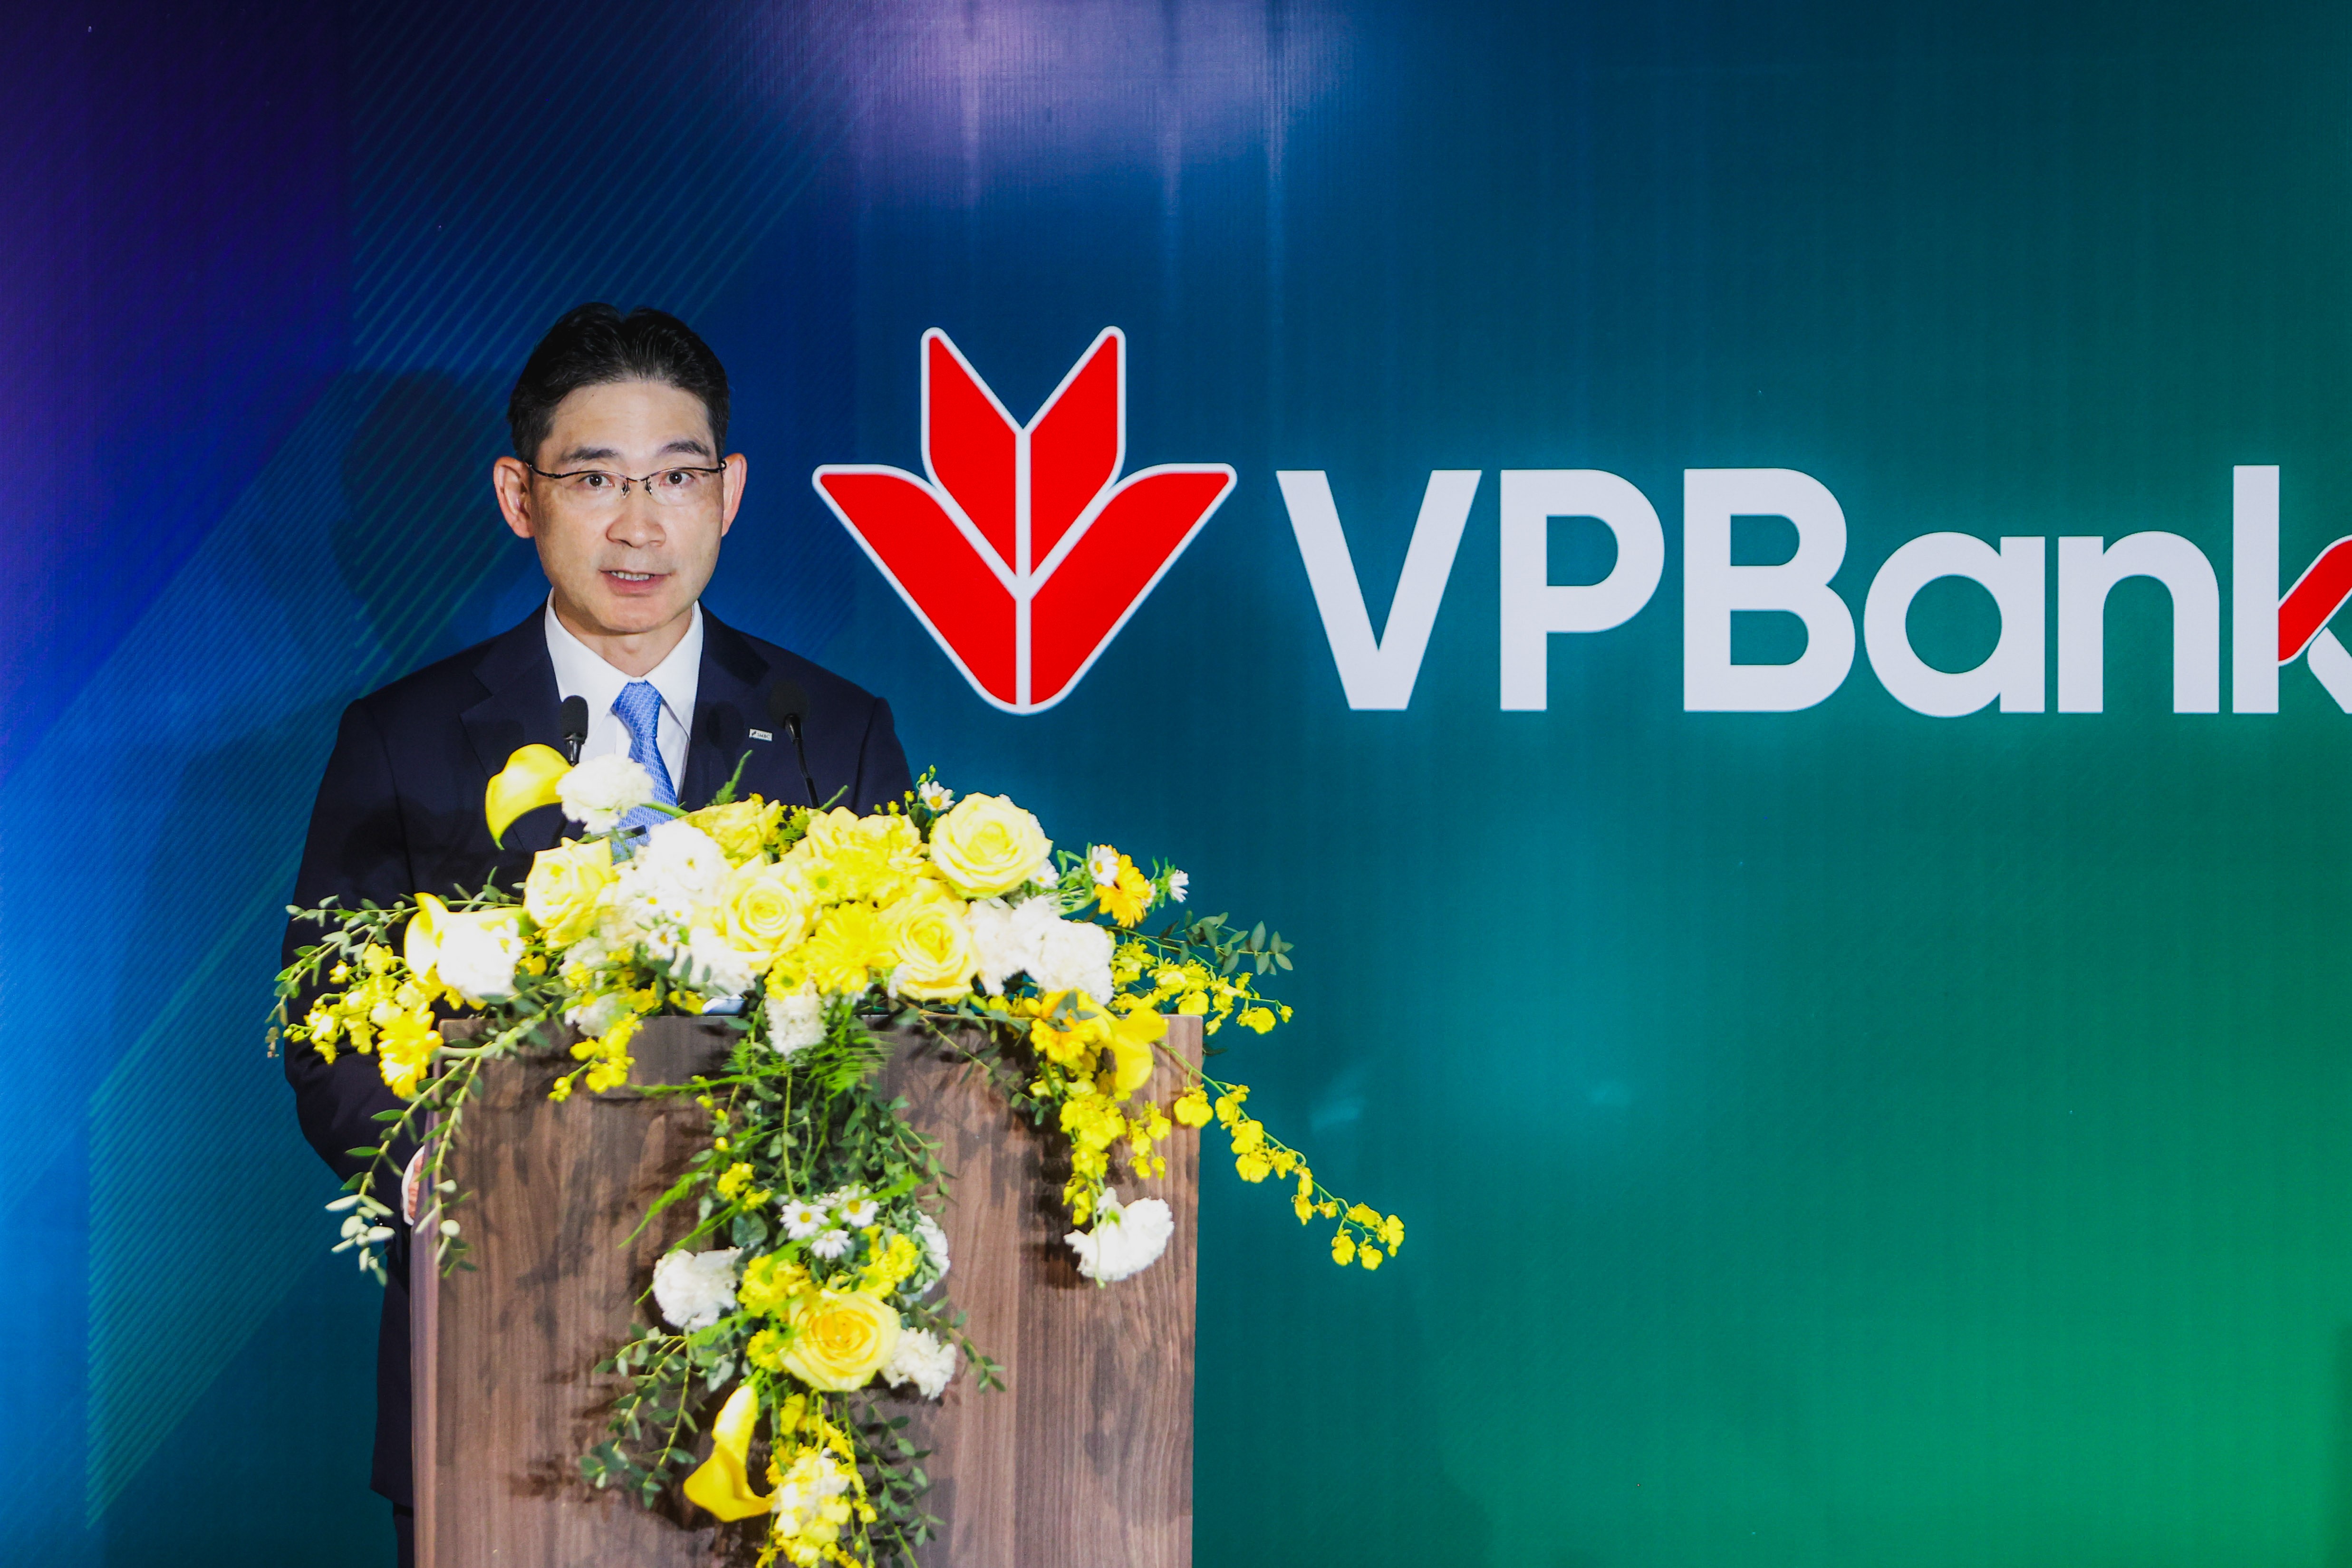 Tetsuro Imaeda, deputy president and executive officer at SMFG and co-head of global banking at SMBC, noted that the event marks a new chapter of VPBank and SMBC as strategic partners on the journey of shared growth and prosperity.